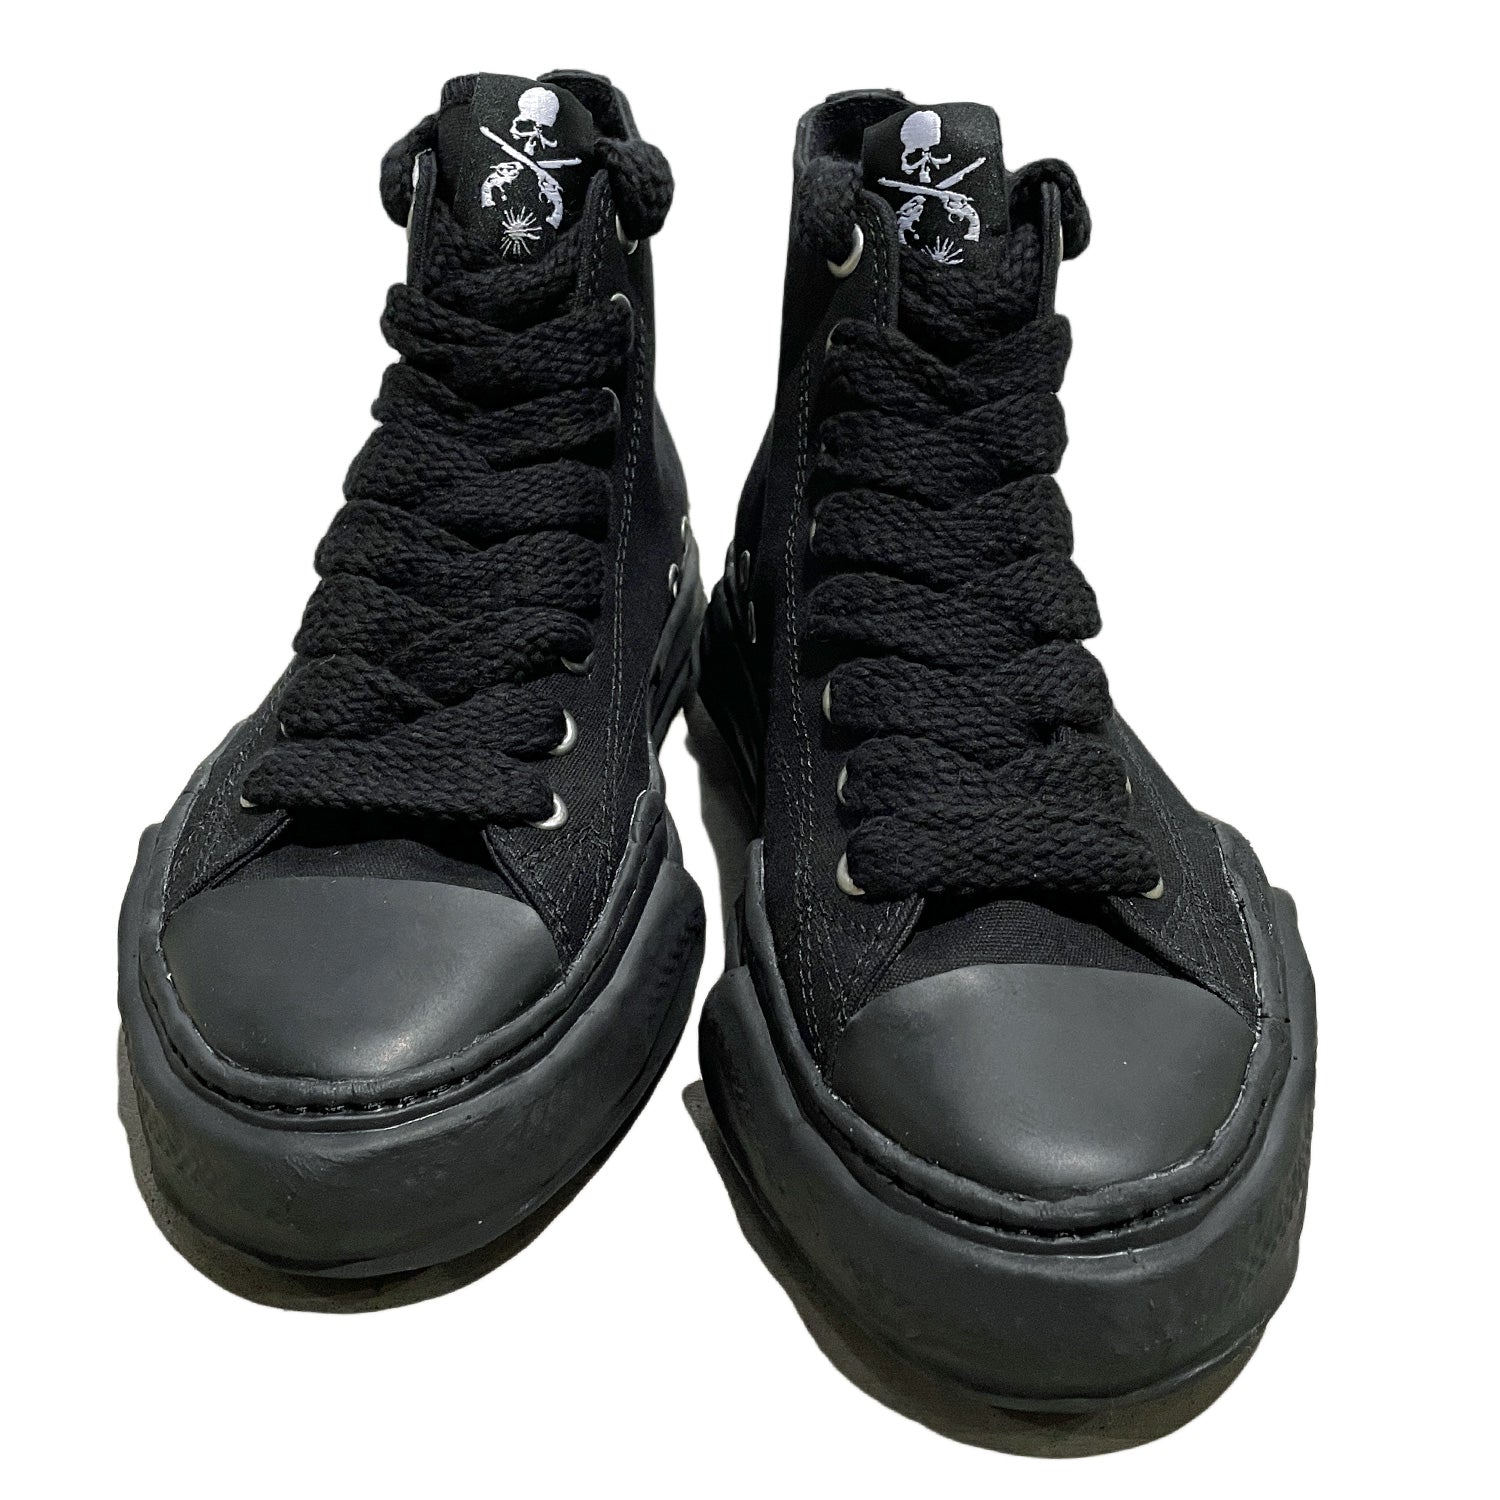 Load image into Gallery viewer, MASTERMIND WORLD x MAISON MIHARA YASUHIRO x roarguns SNEAKER / ALL BLACK LIMITED EDITION